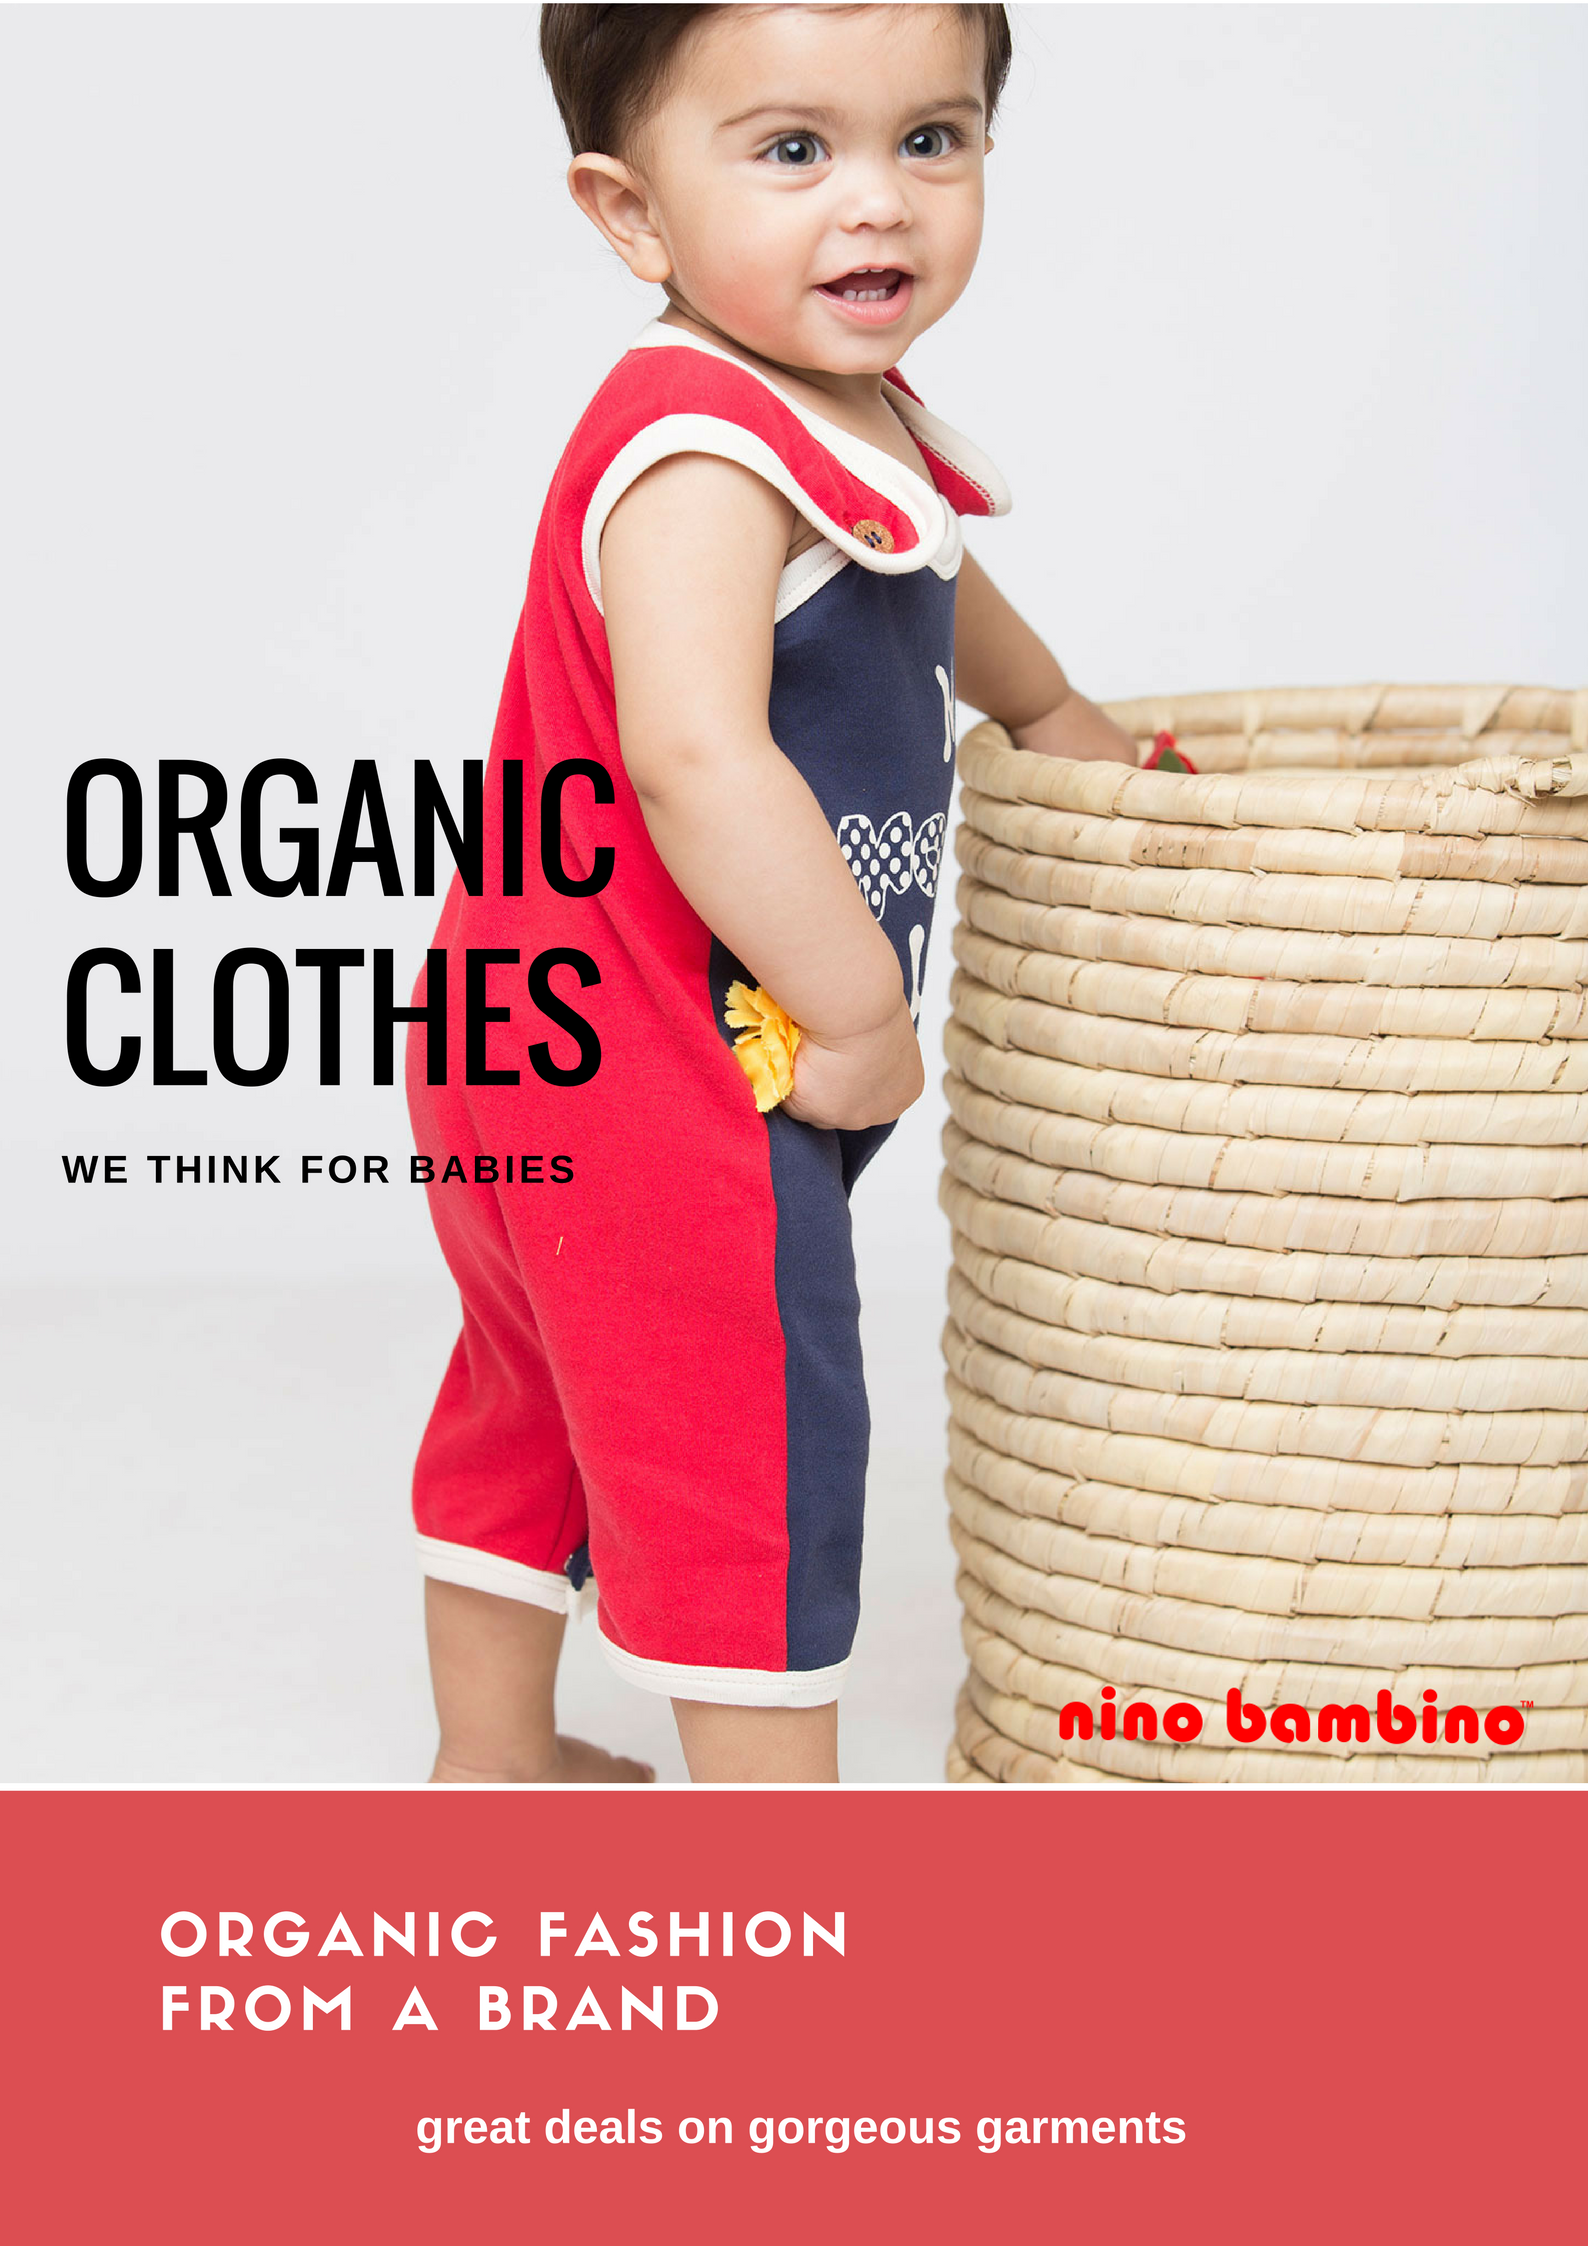 Baby Dress Online ShoppingHome and LifestyleBaby - Infant ProductsNoidaNoida Sector 10